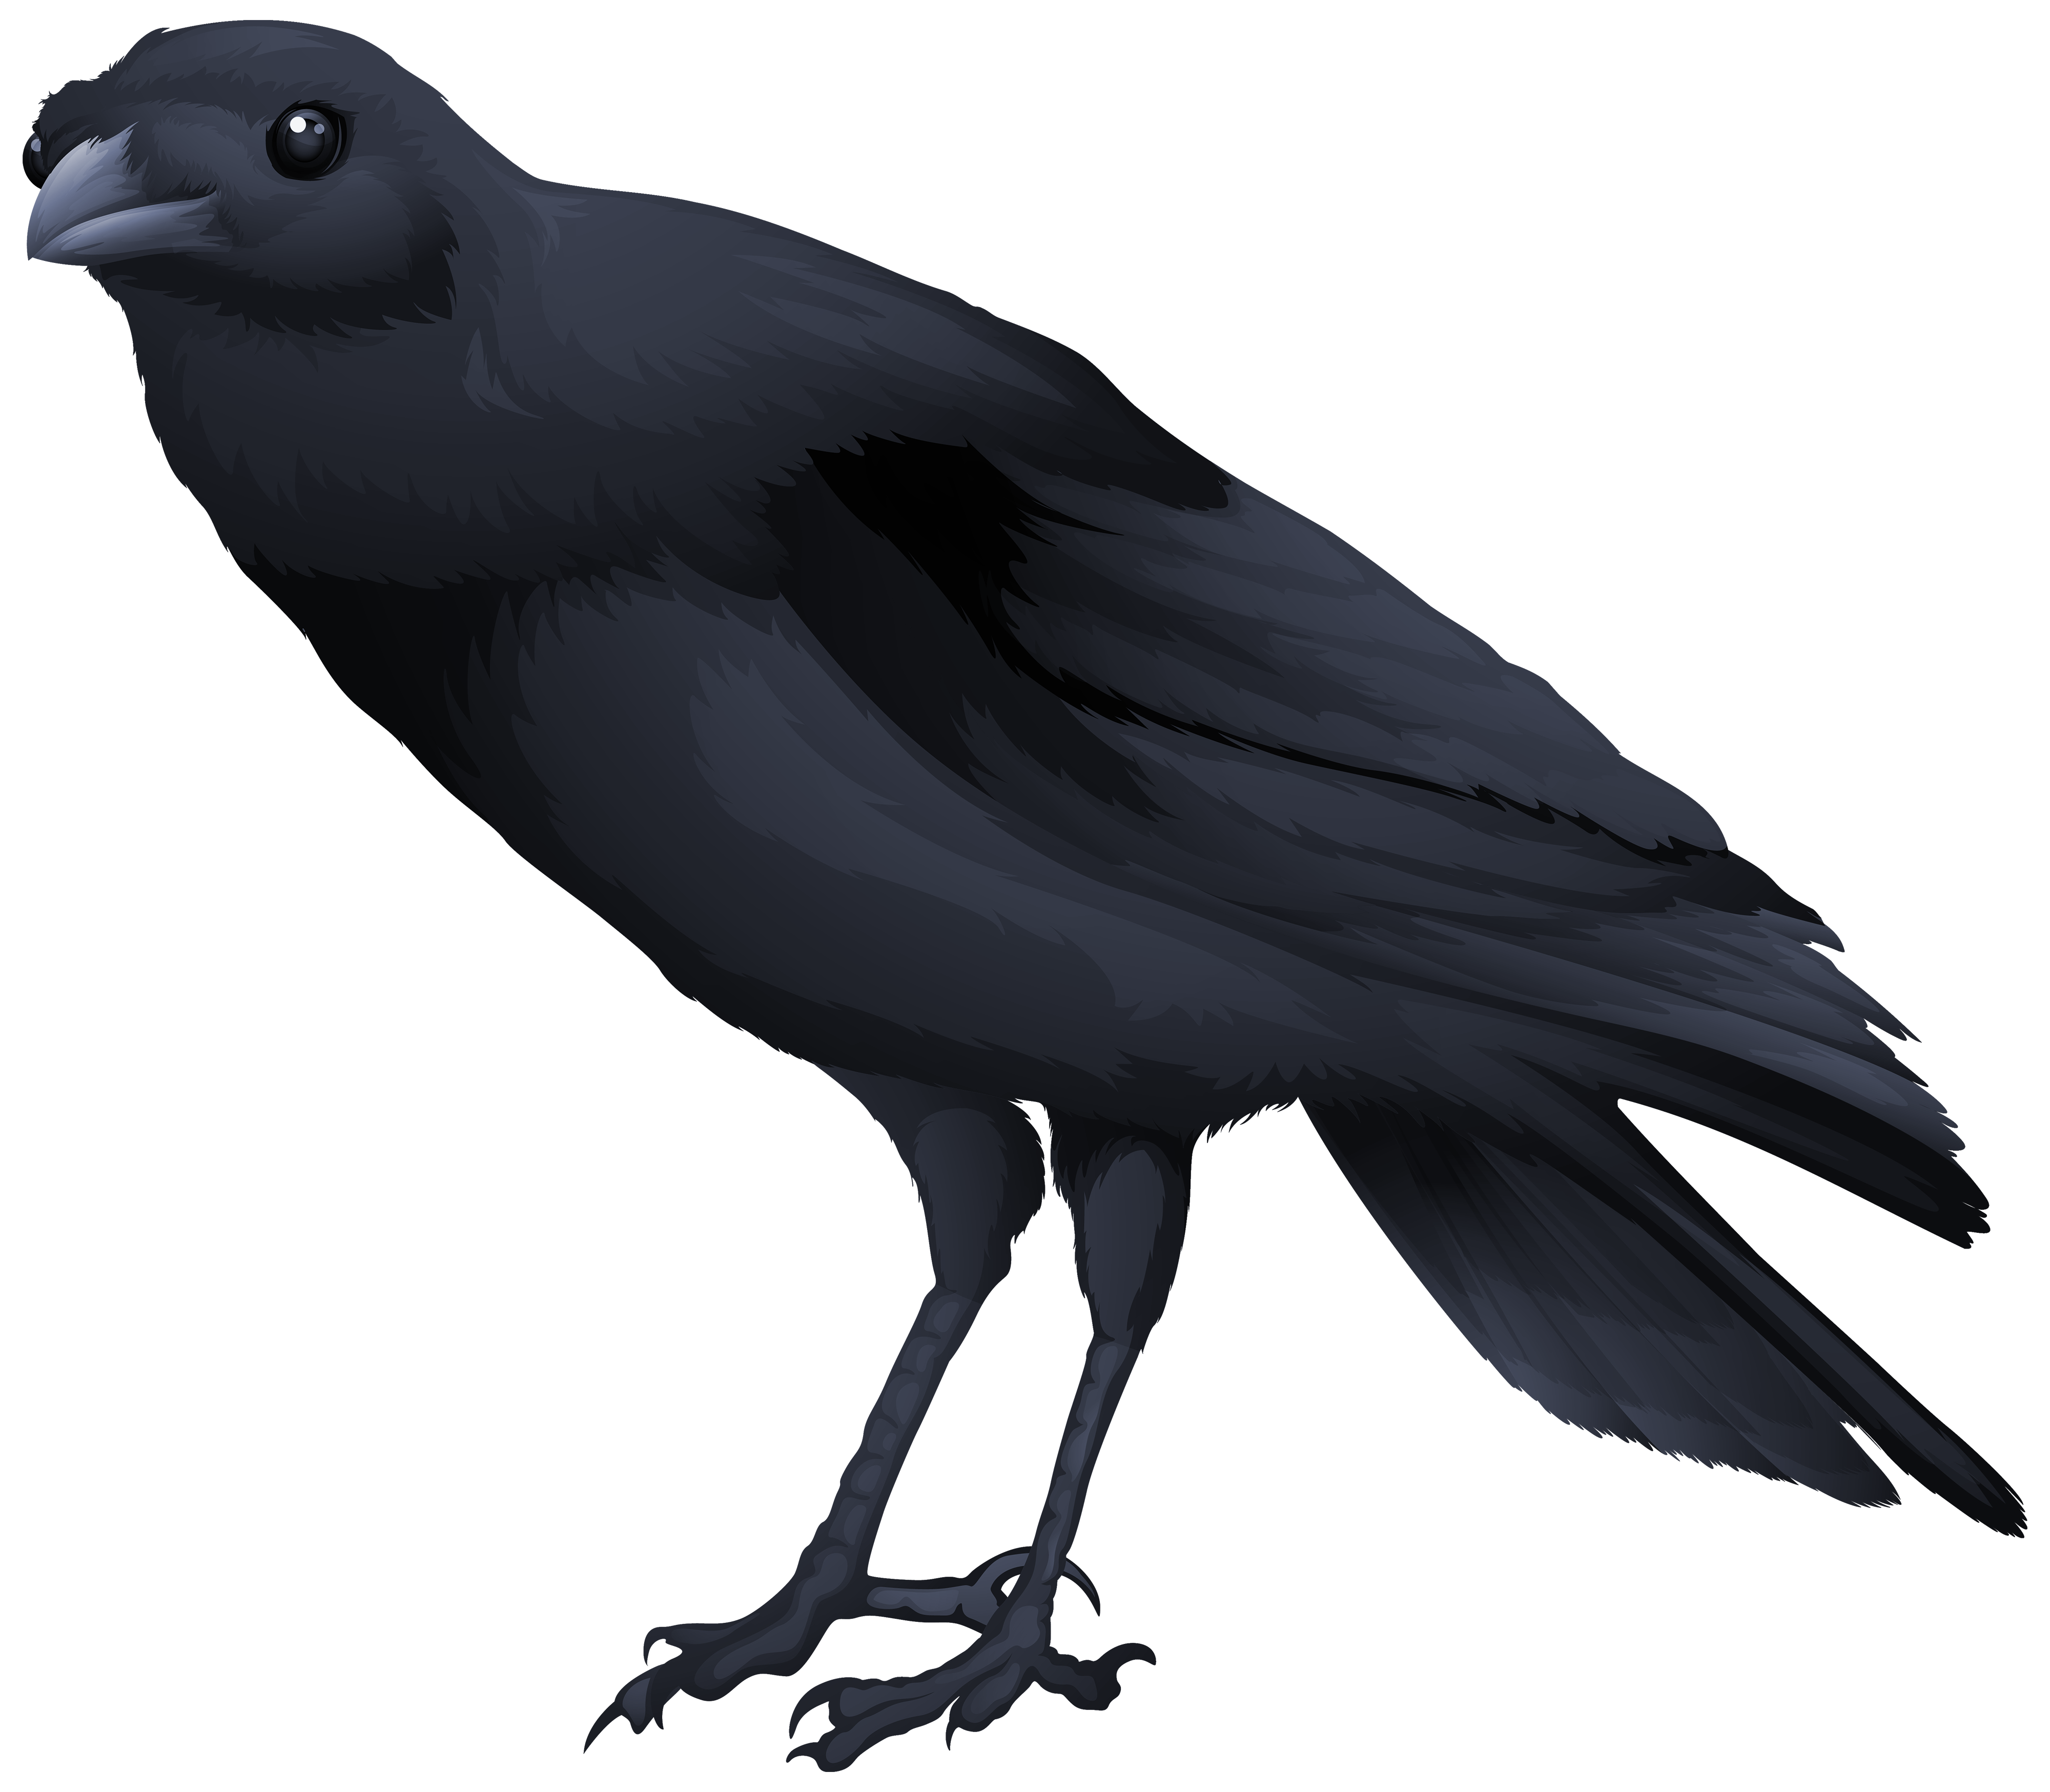 Black Bird PNG Clipart Image | Gallery Yopriceville - High-Quality ...